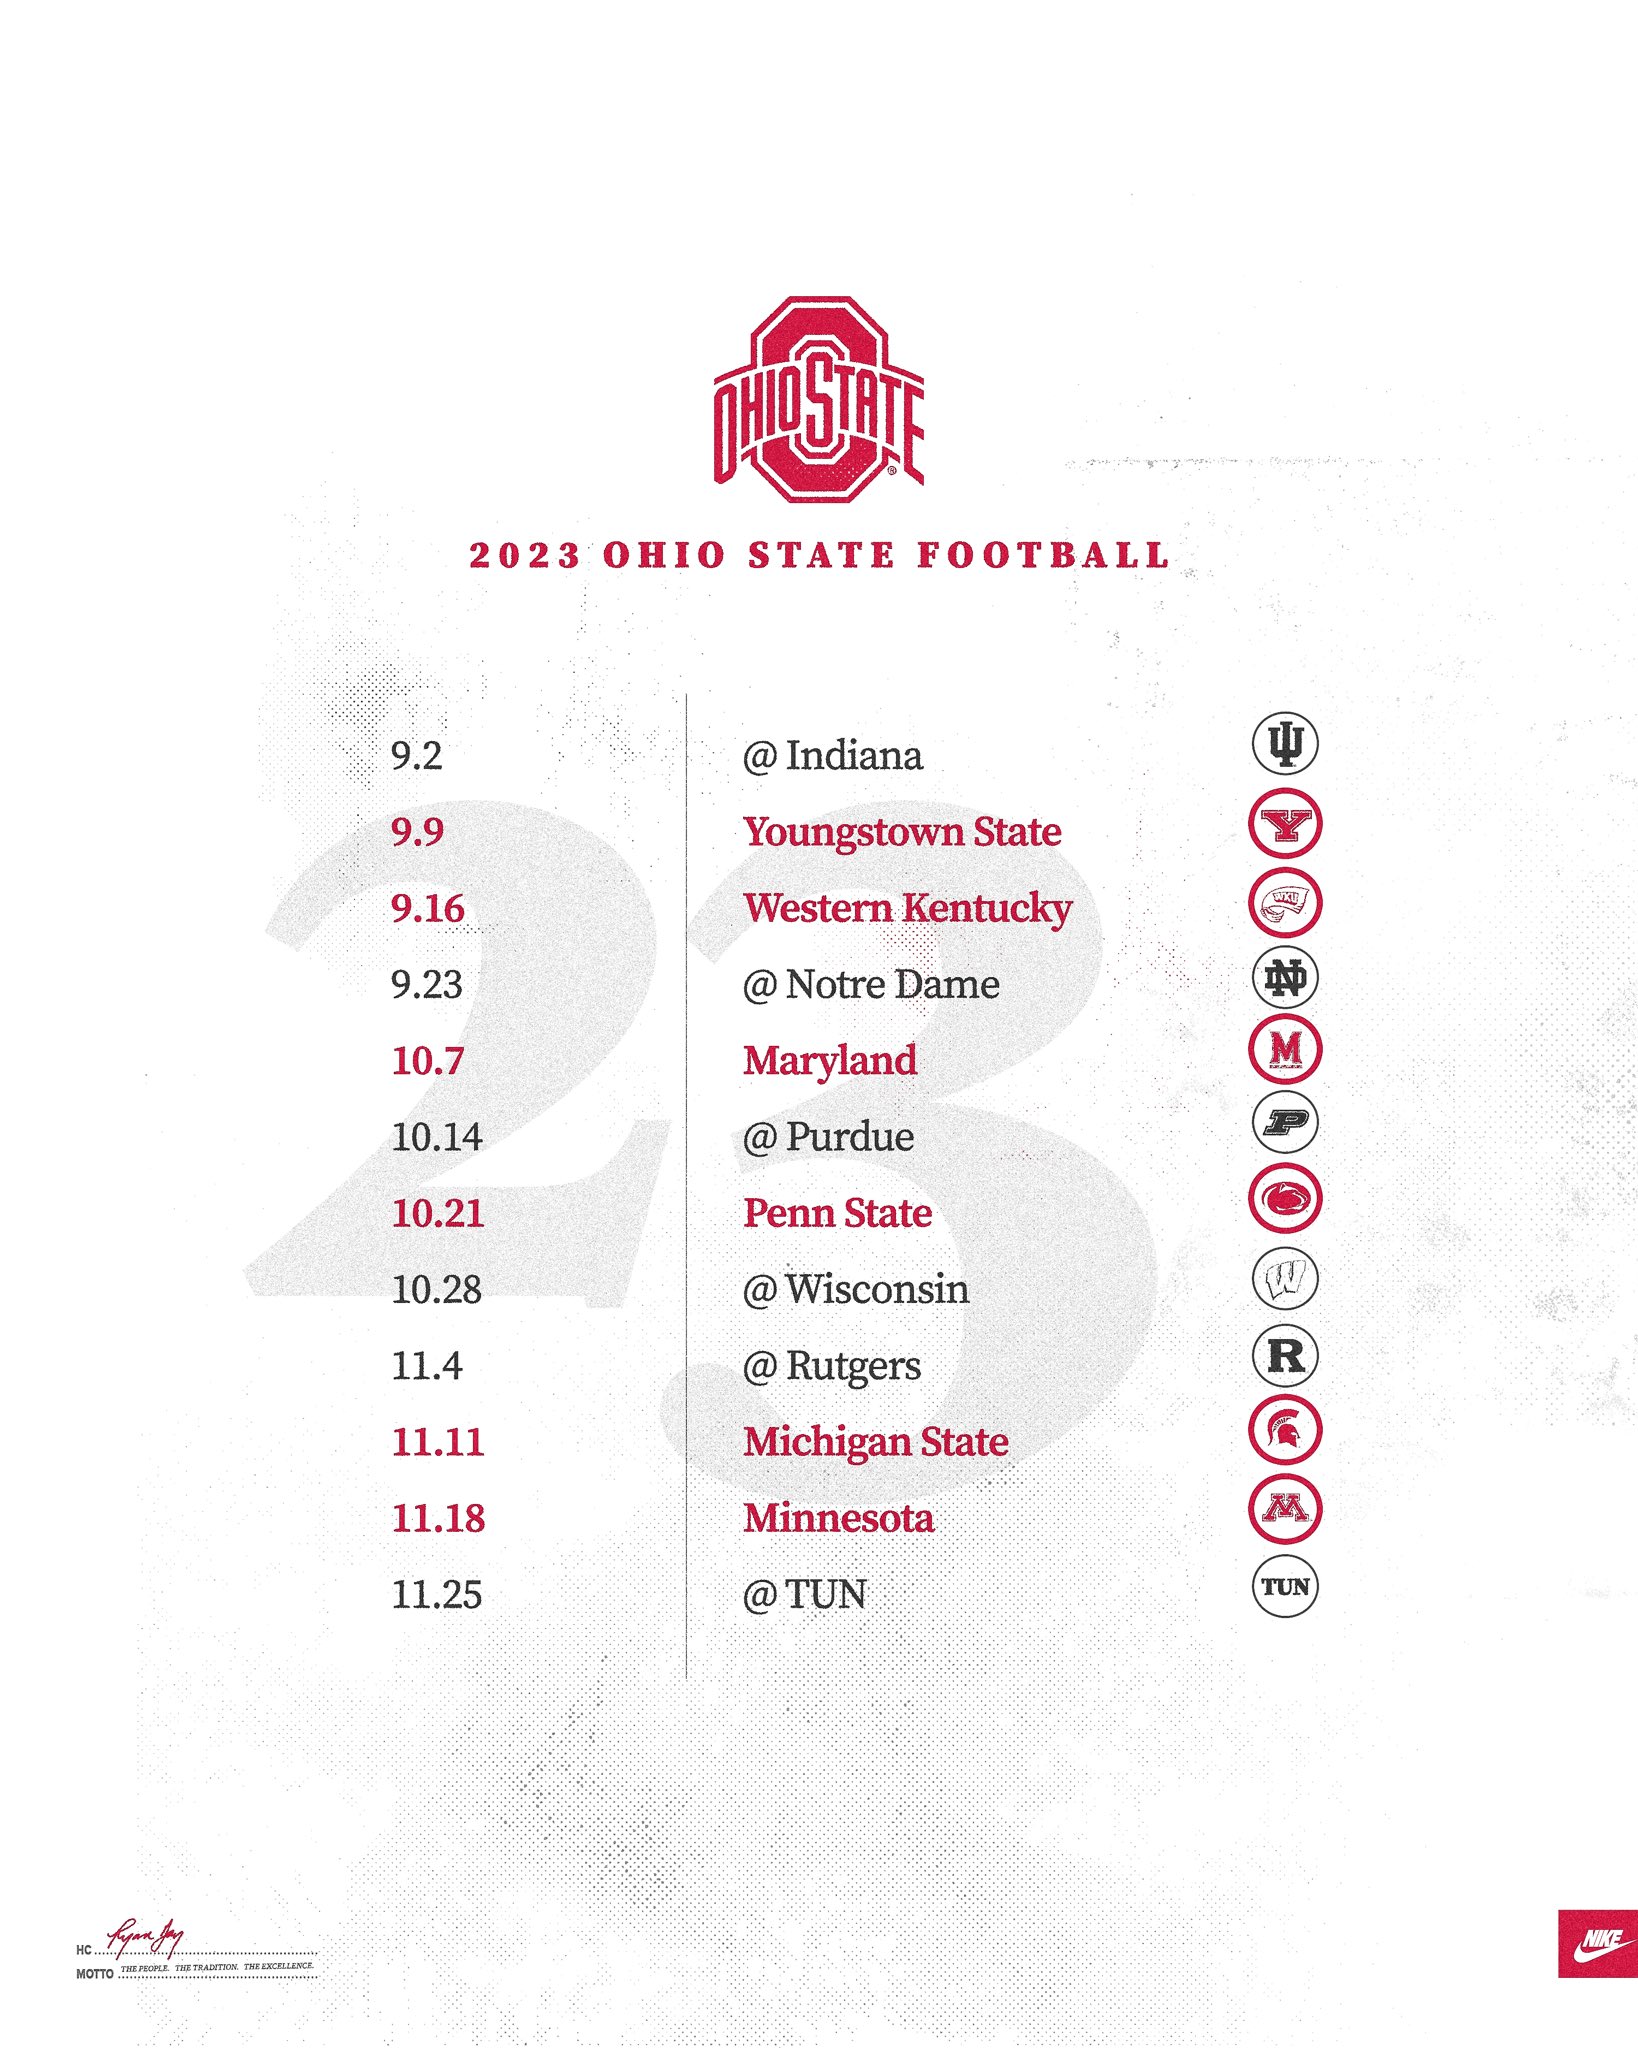 2023 Ohio State football schedule: Dates, times, TV channels